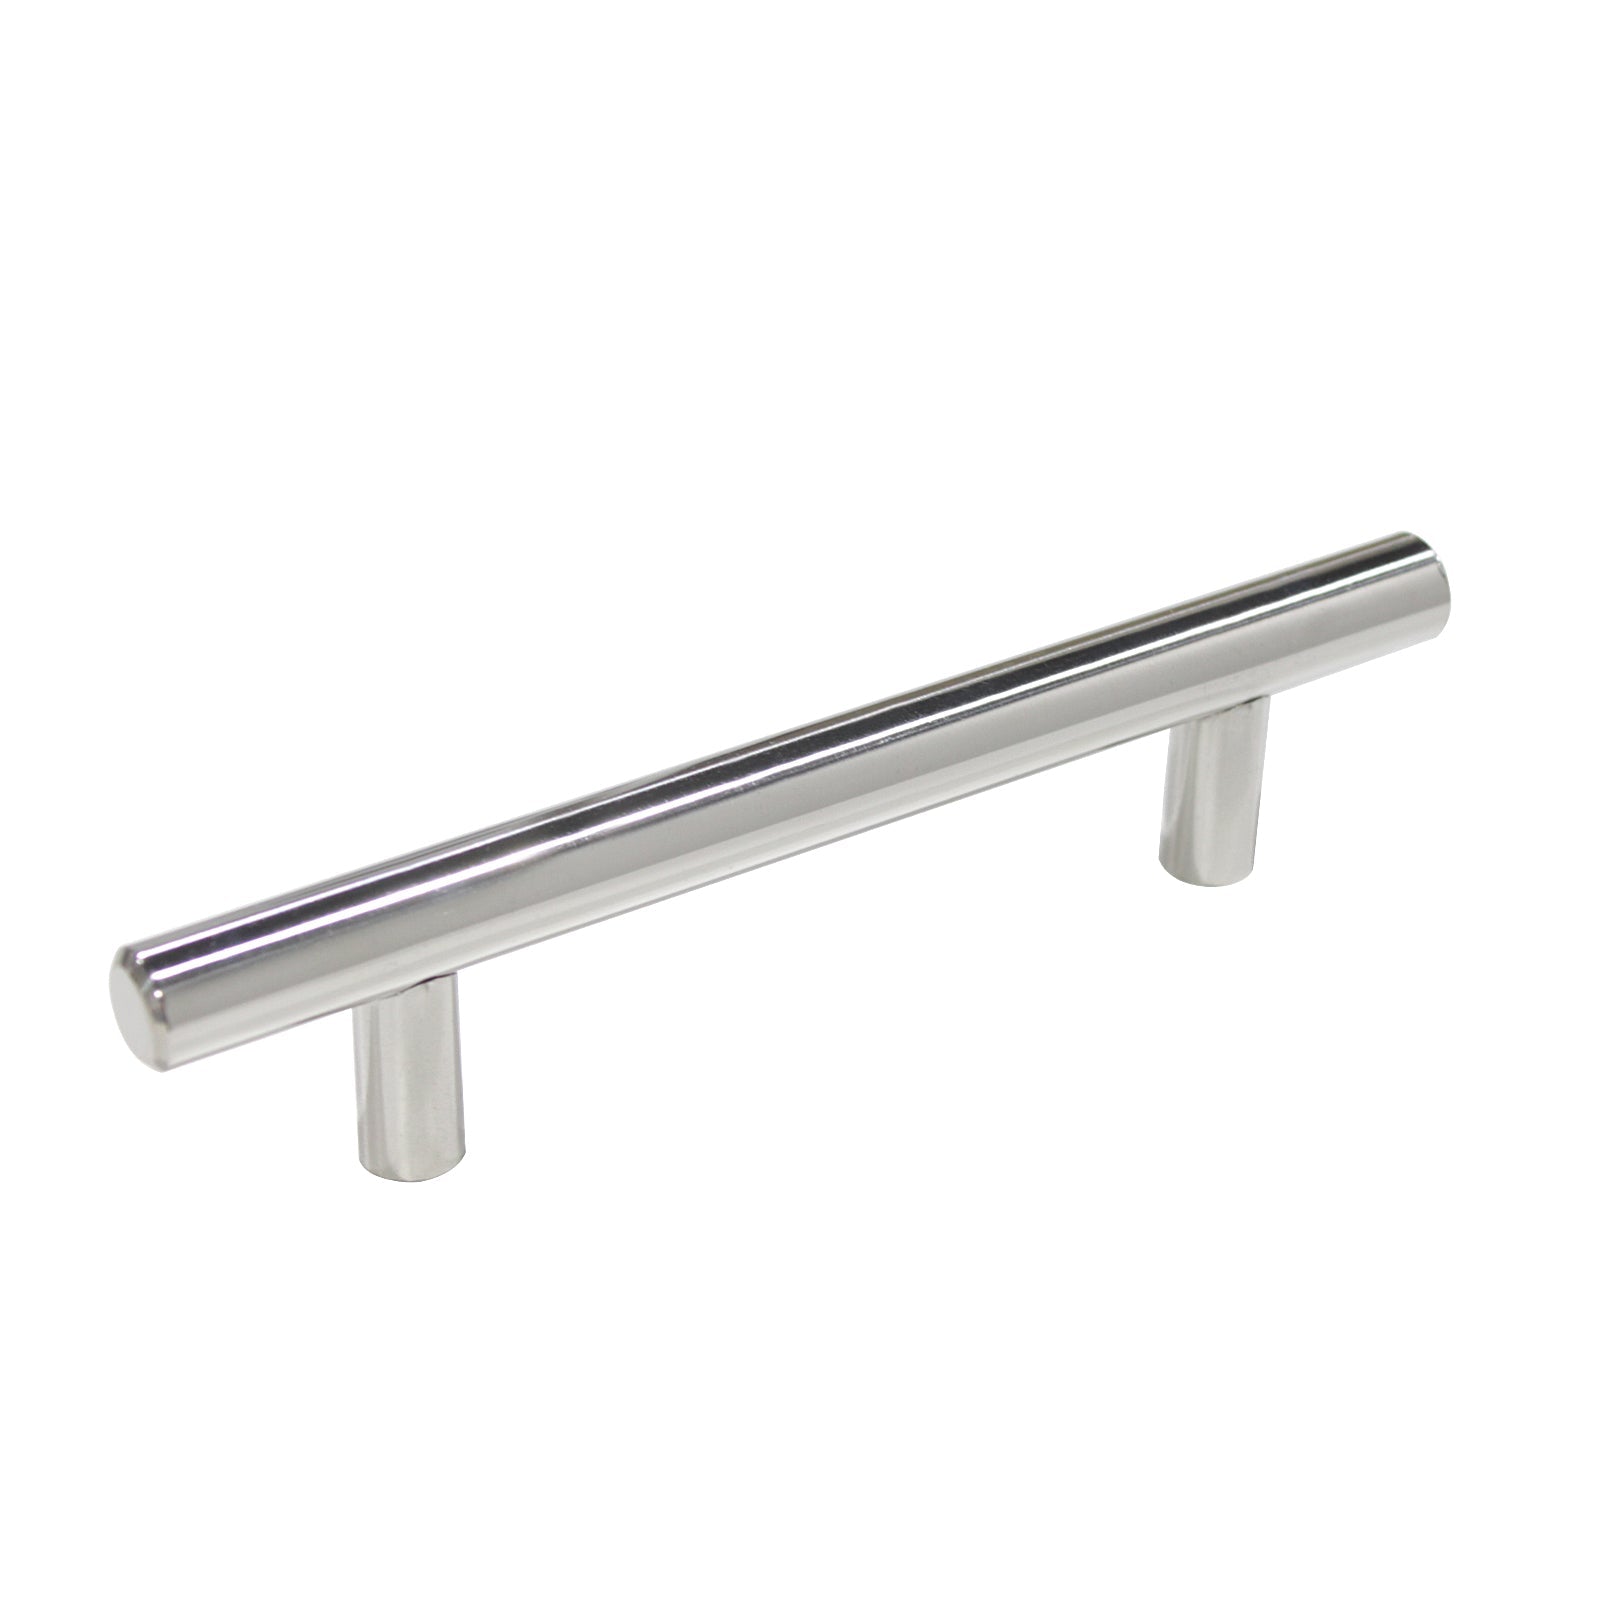 Probrico Stainless Steel T Bar Cabinet Handles Polished Chrome Finish, 96mm 3 3/4inch Hole Centers 100 pack